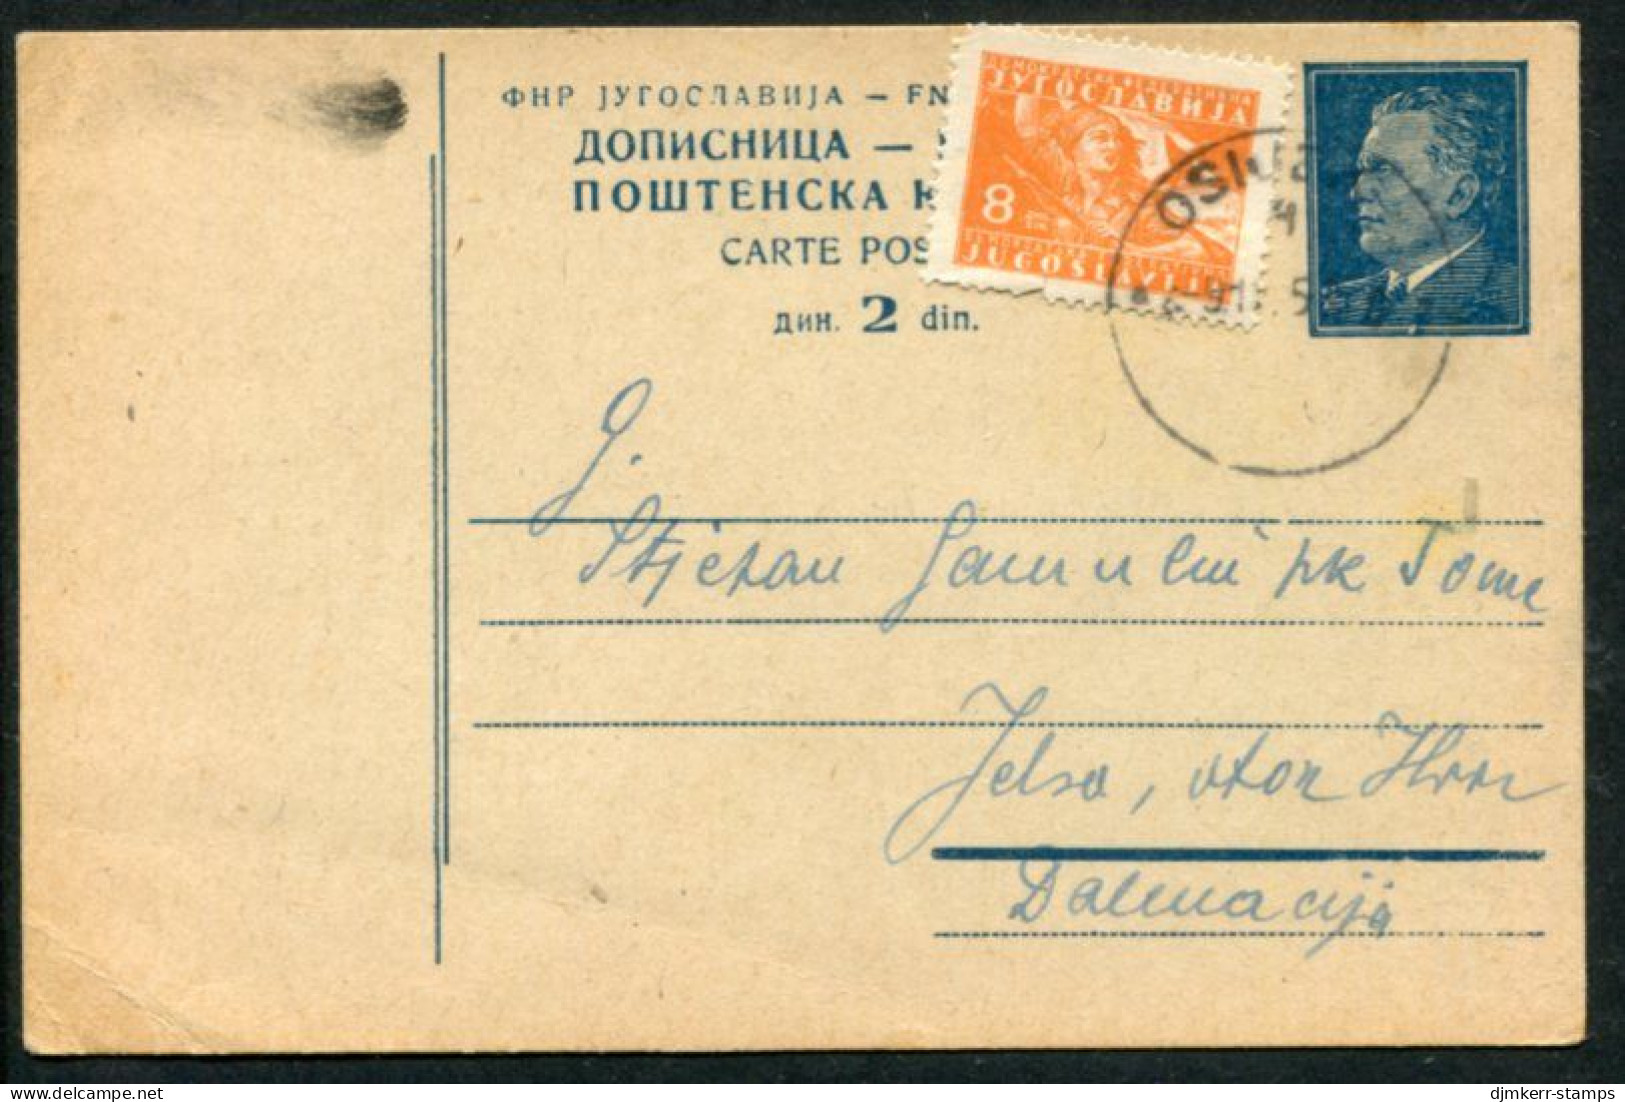 YUGOSLAVIA 1949 Tito 2 (d) Postal Stationery Card, Used With Additional Stamp.  Michel P129 - Enteros Postales